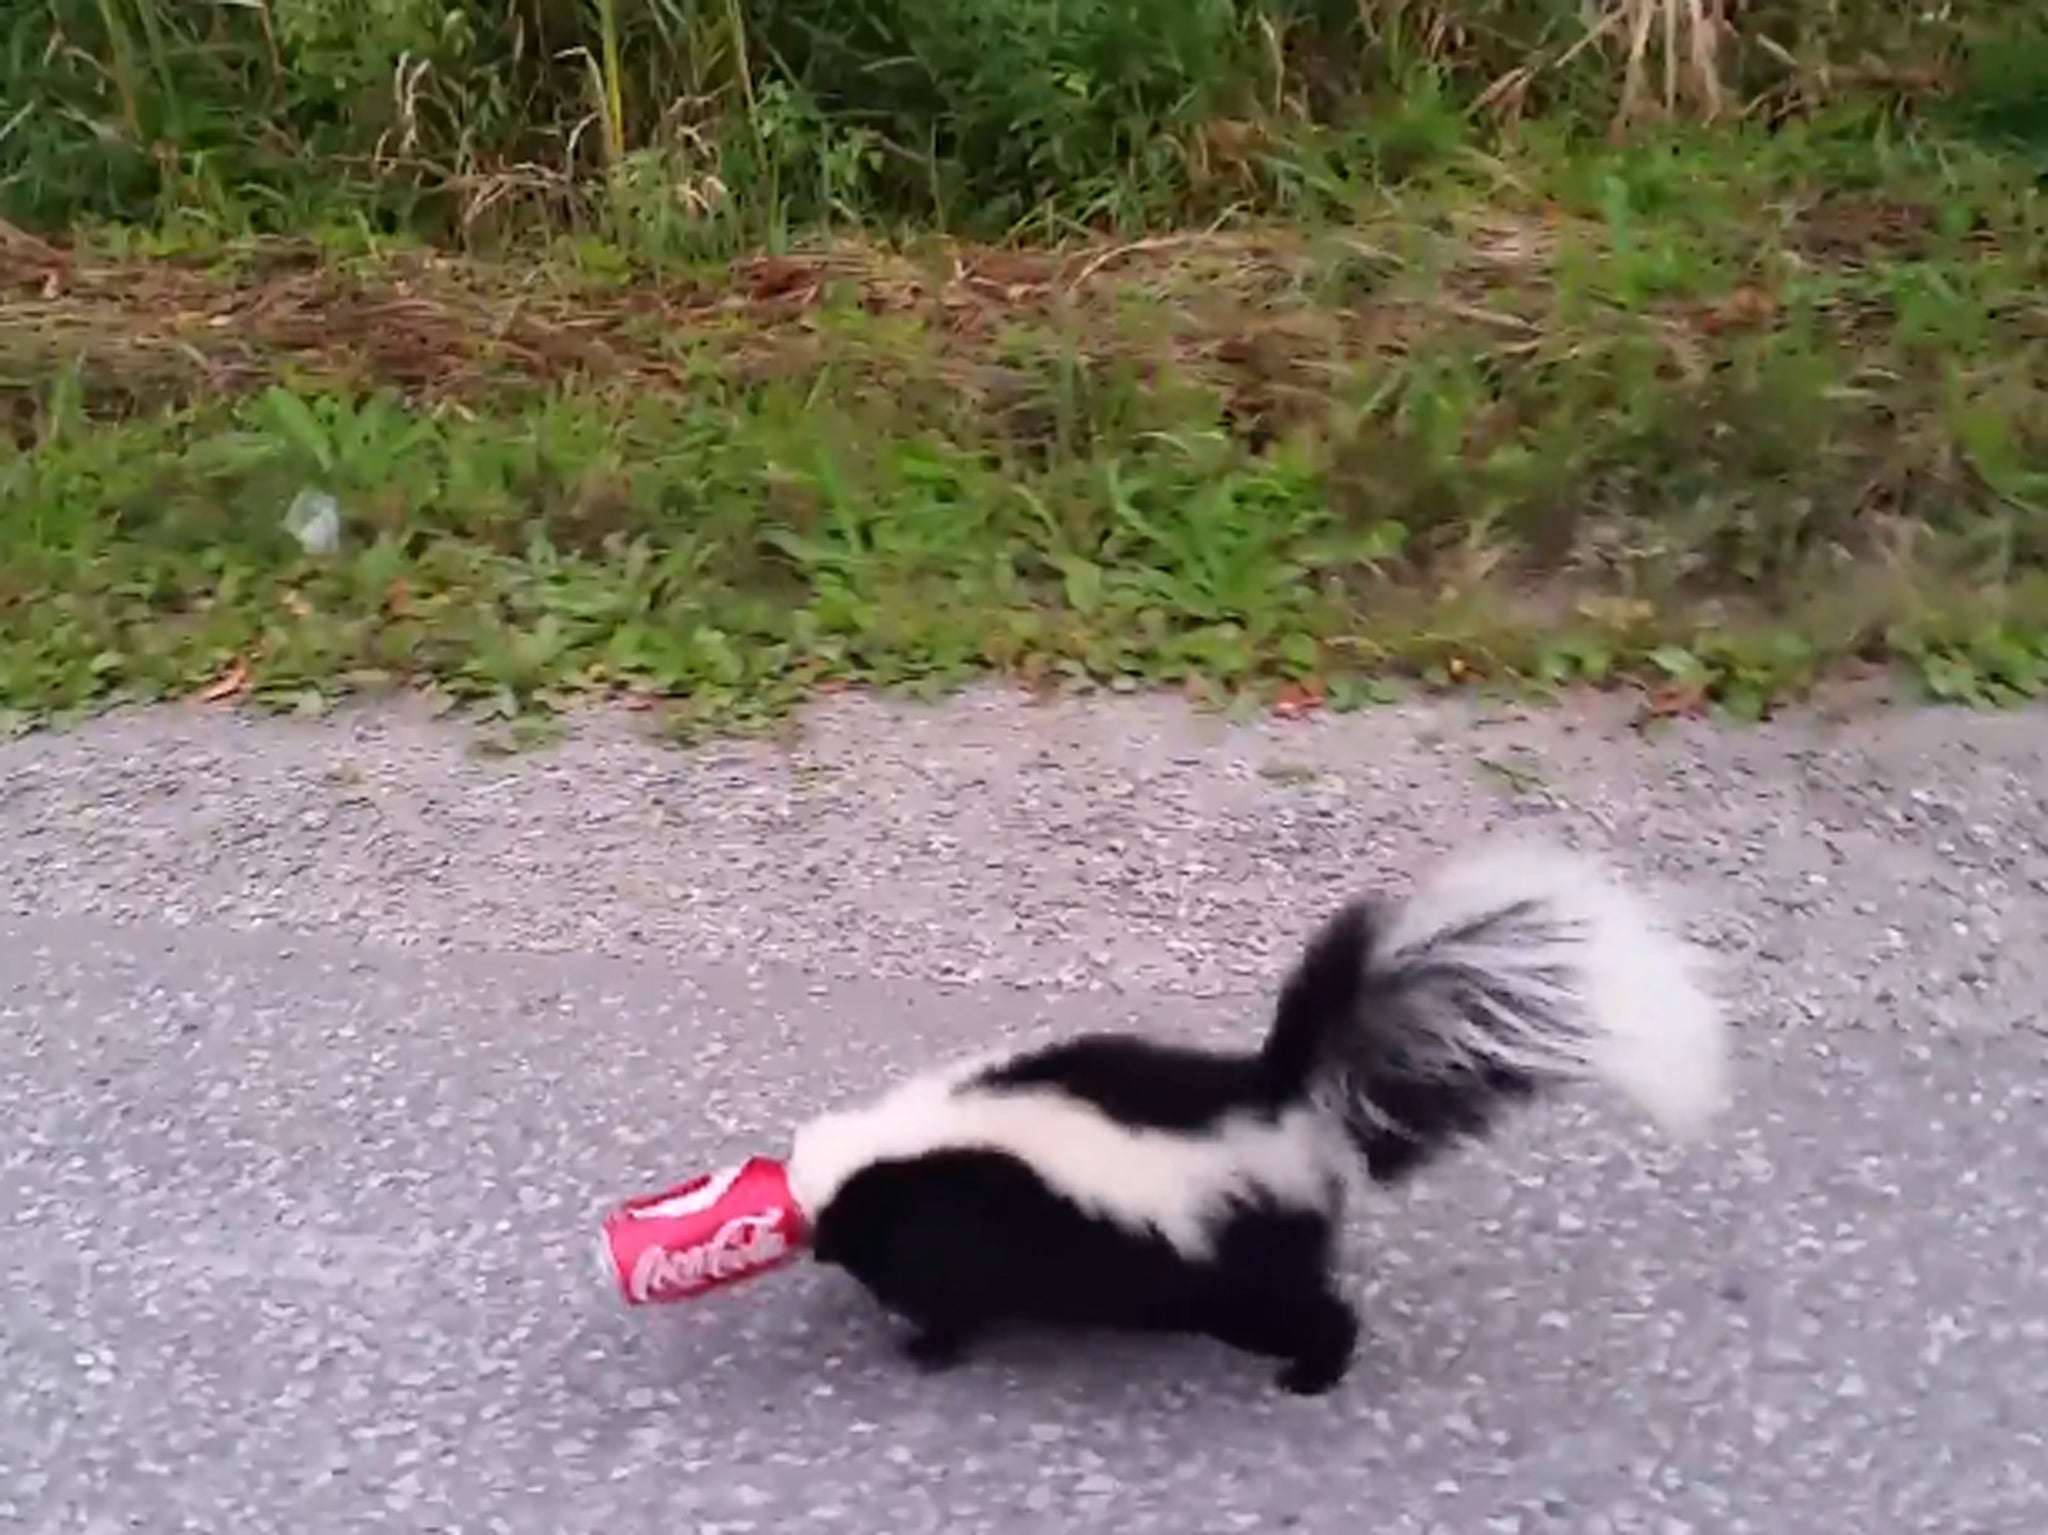 Despite being dressed in his best suit, Canadian Mike McMillan pulled over to help a skunk with his head stuck in a soda can